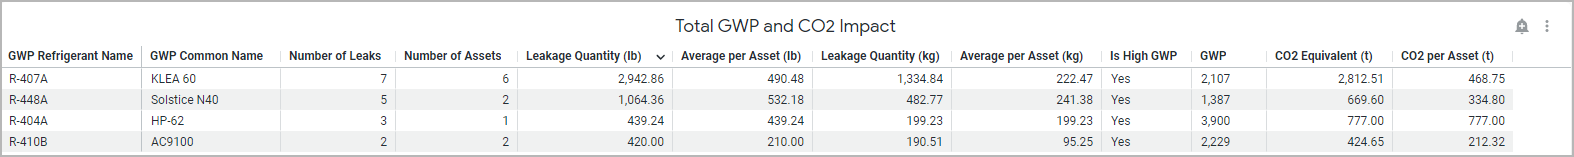 Table showing GWP equivalents and values of each refrigerant type as well as their CO2 equivalents 